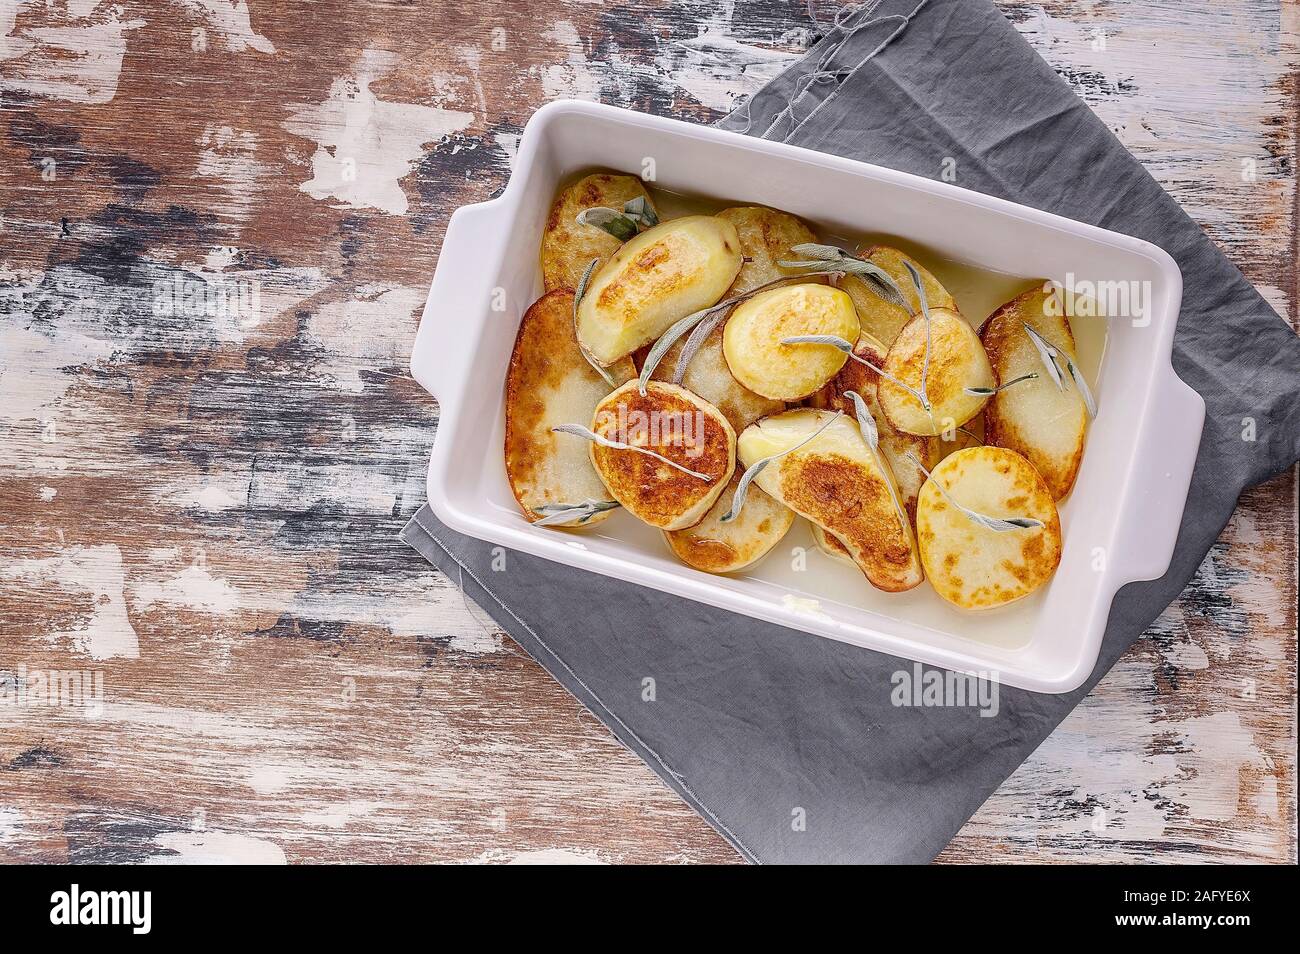 Baked sliced potato with red onion and herbs: sage, rosemary and thyme in a ceramic baking dish. Top view. Copy space Stock Photo